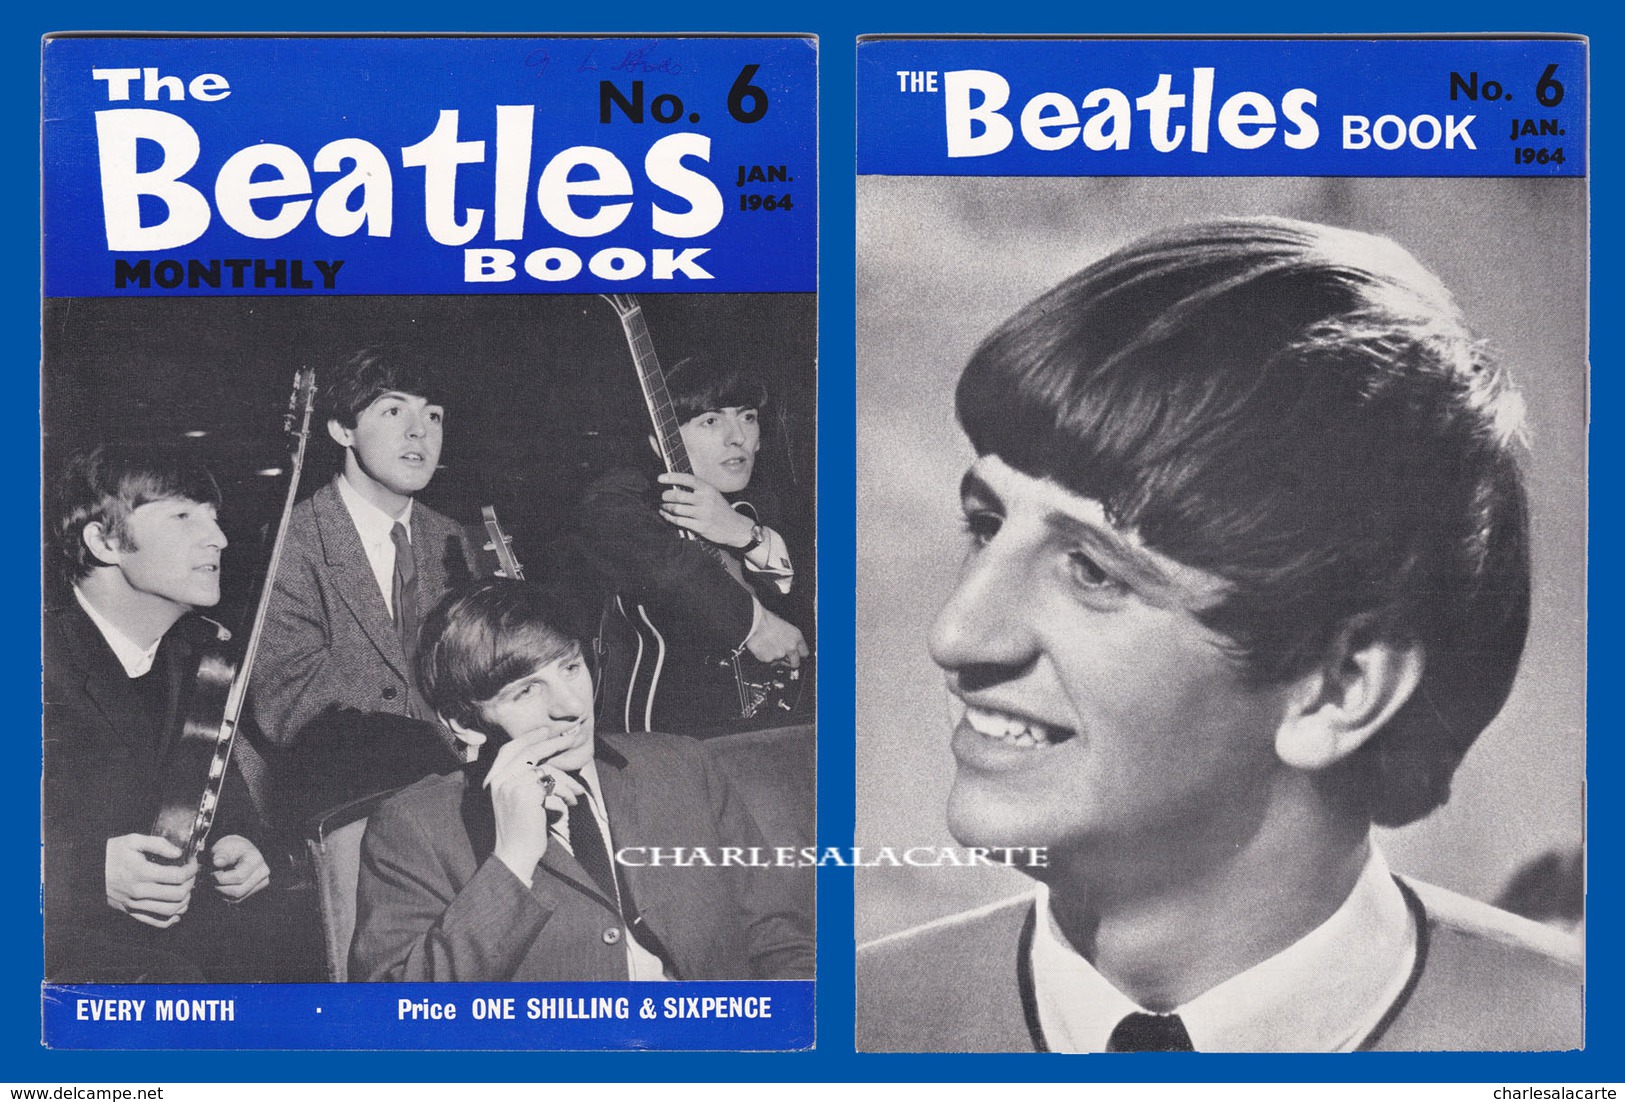 1964 JANUARY THE BEATLES MONTHLY BOOK No.6 AUTHENTIC SUBERB CONDITION SEE THE SCAN - Entretenimiento